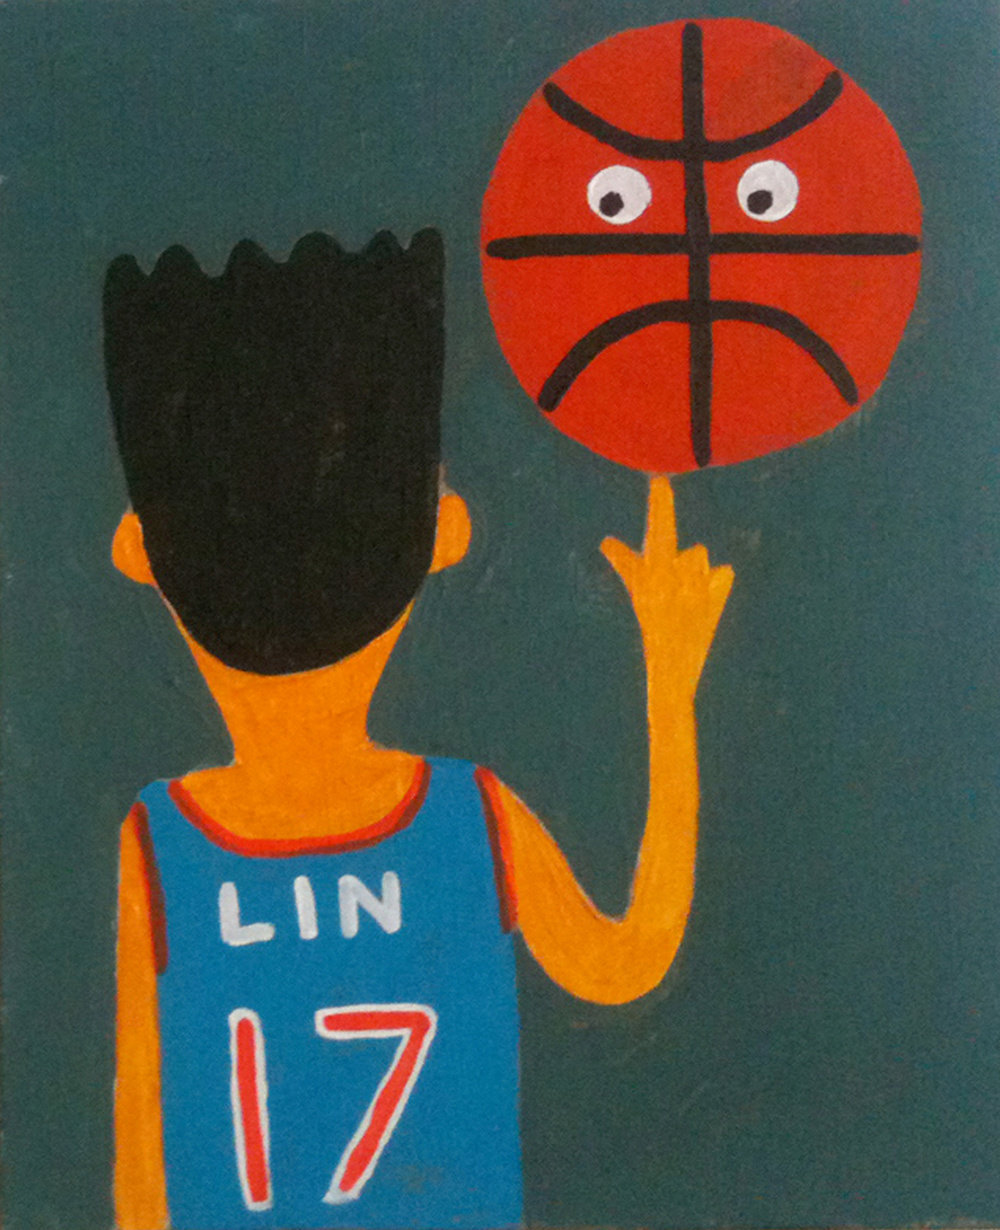 Kuo, jeremy lin #17, 2012, acrylic on linen, 20 x 16 in